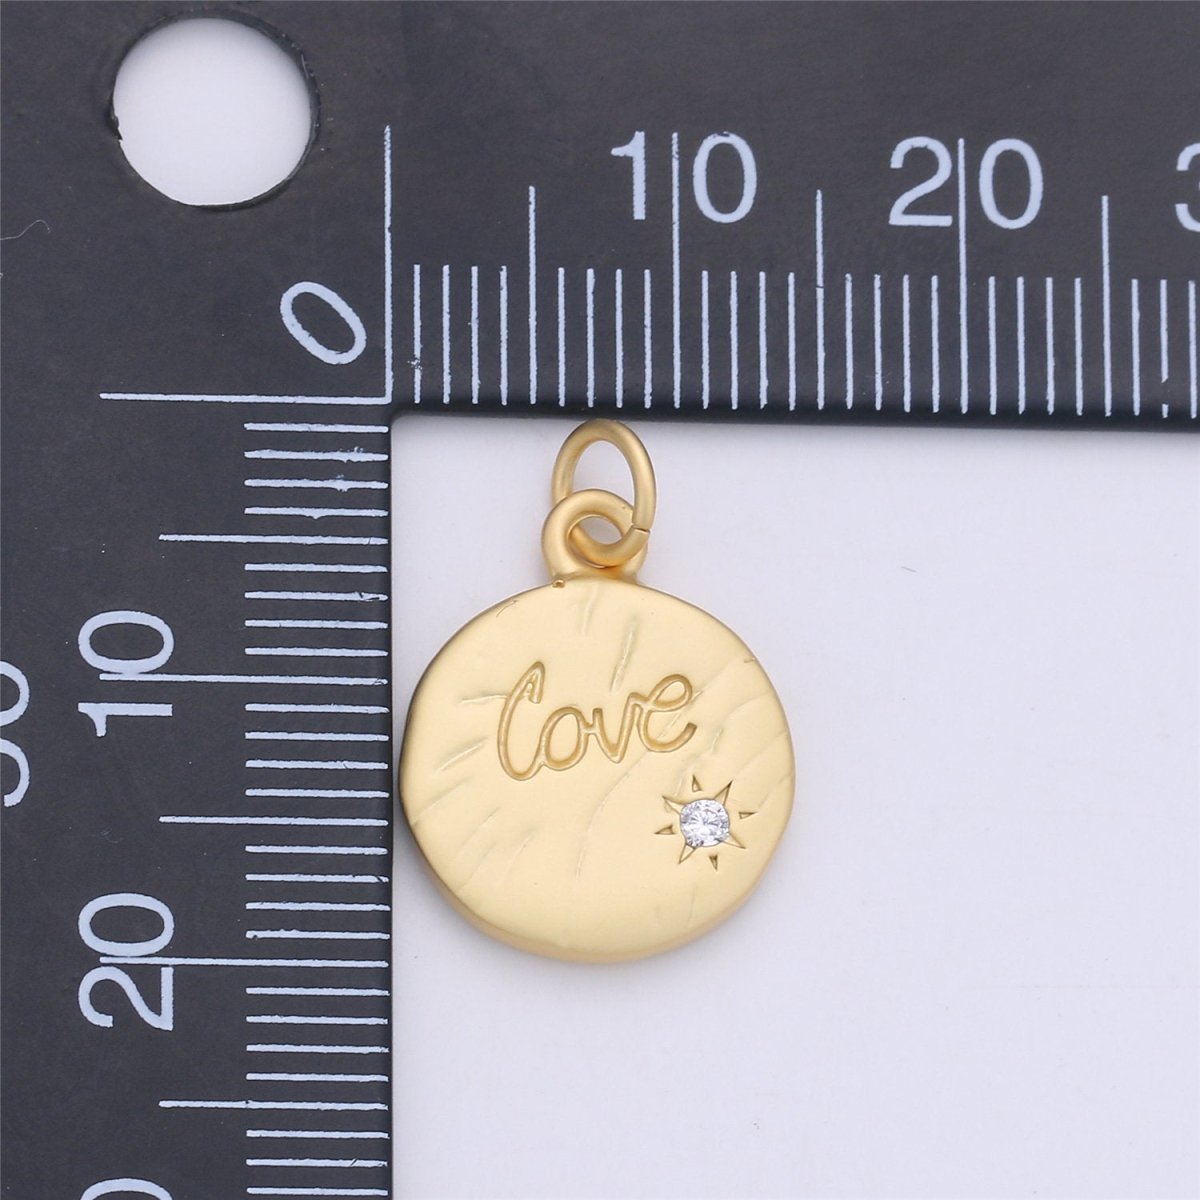 Dainty Gold filled Love Charms Word Disc Charm for necklace bracelet earring Jewelry Making Supply 20x15mm,C-912 - DLUXCA